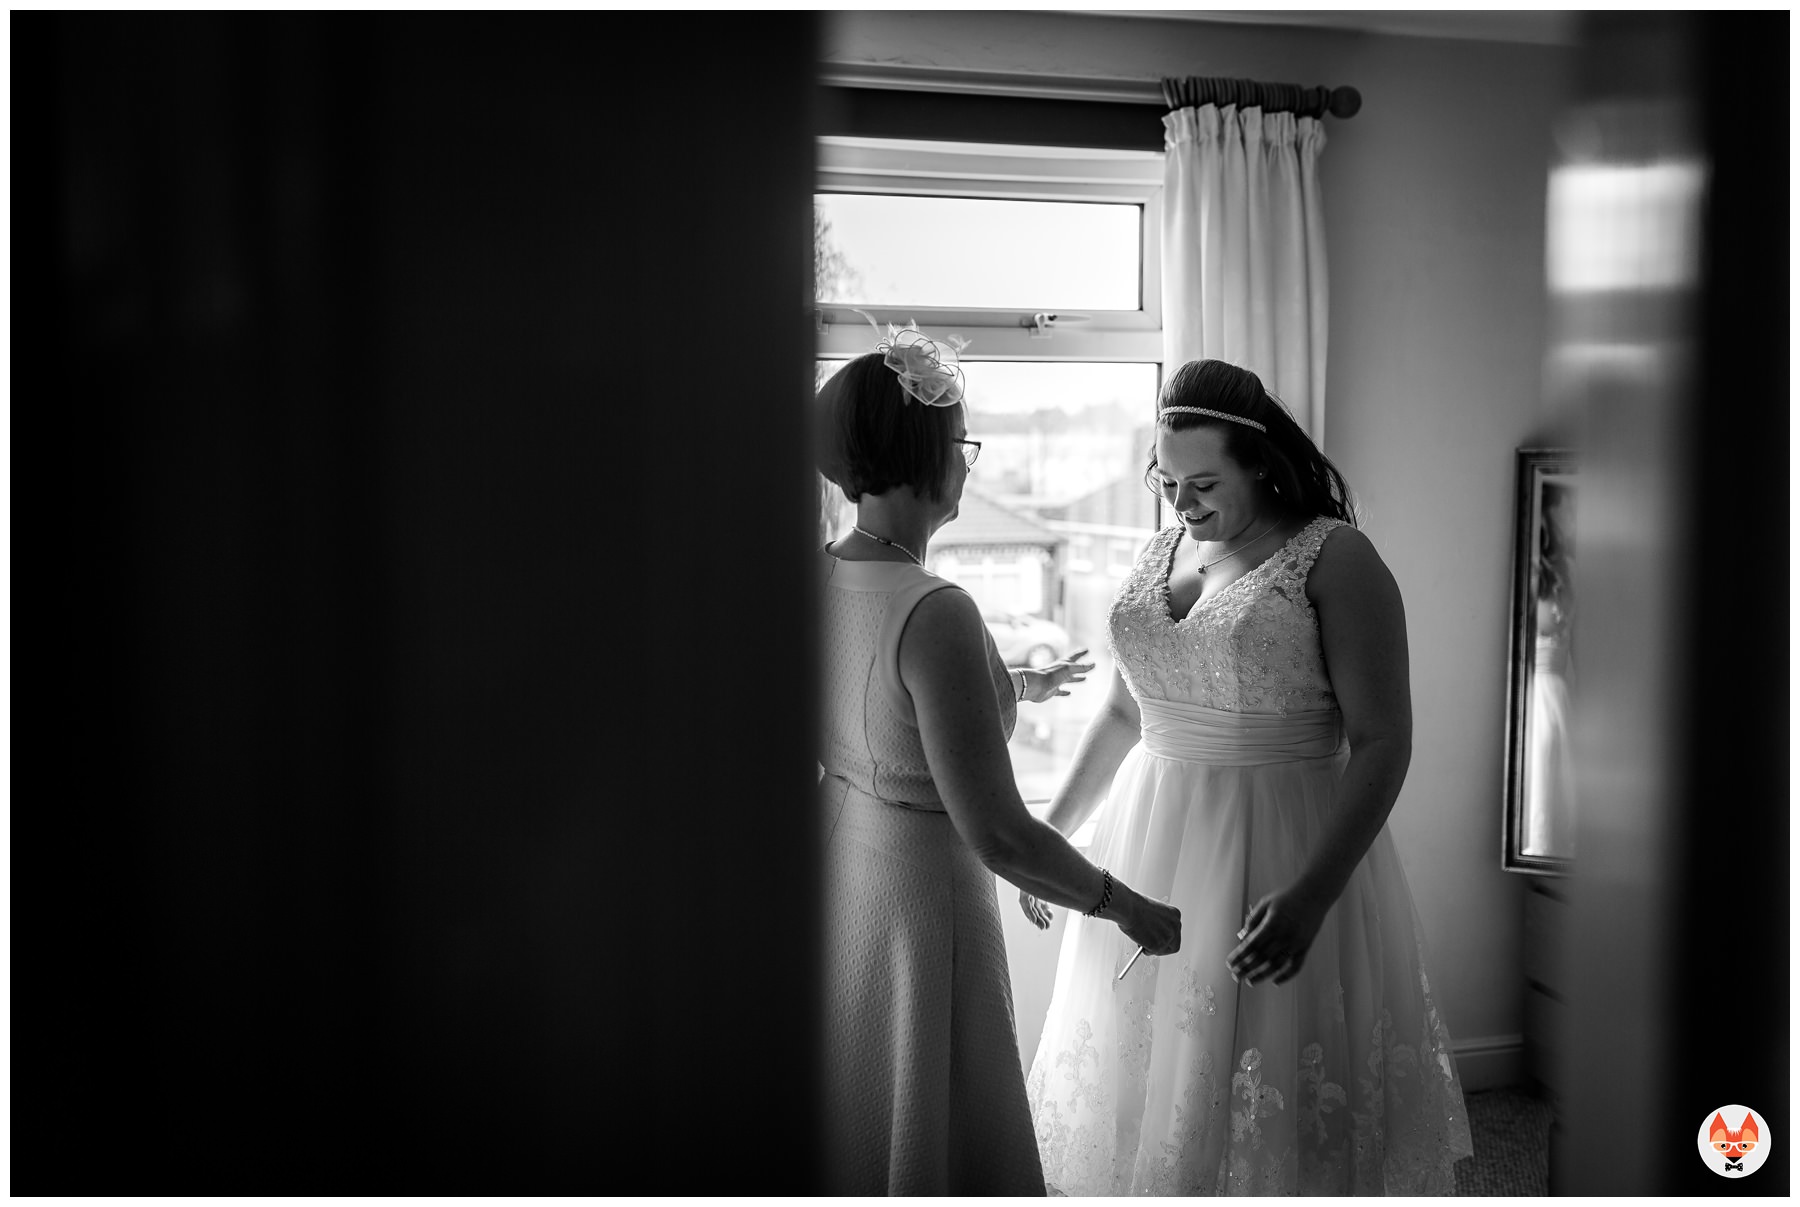 mum seeings bride in dress for first time